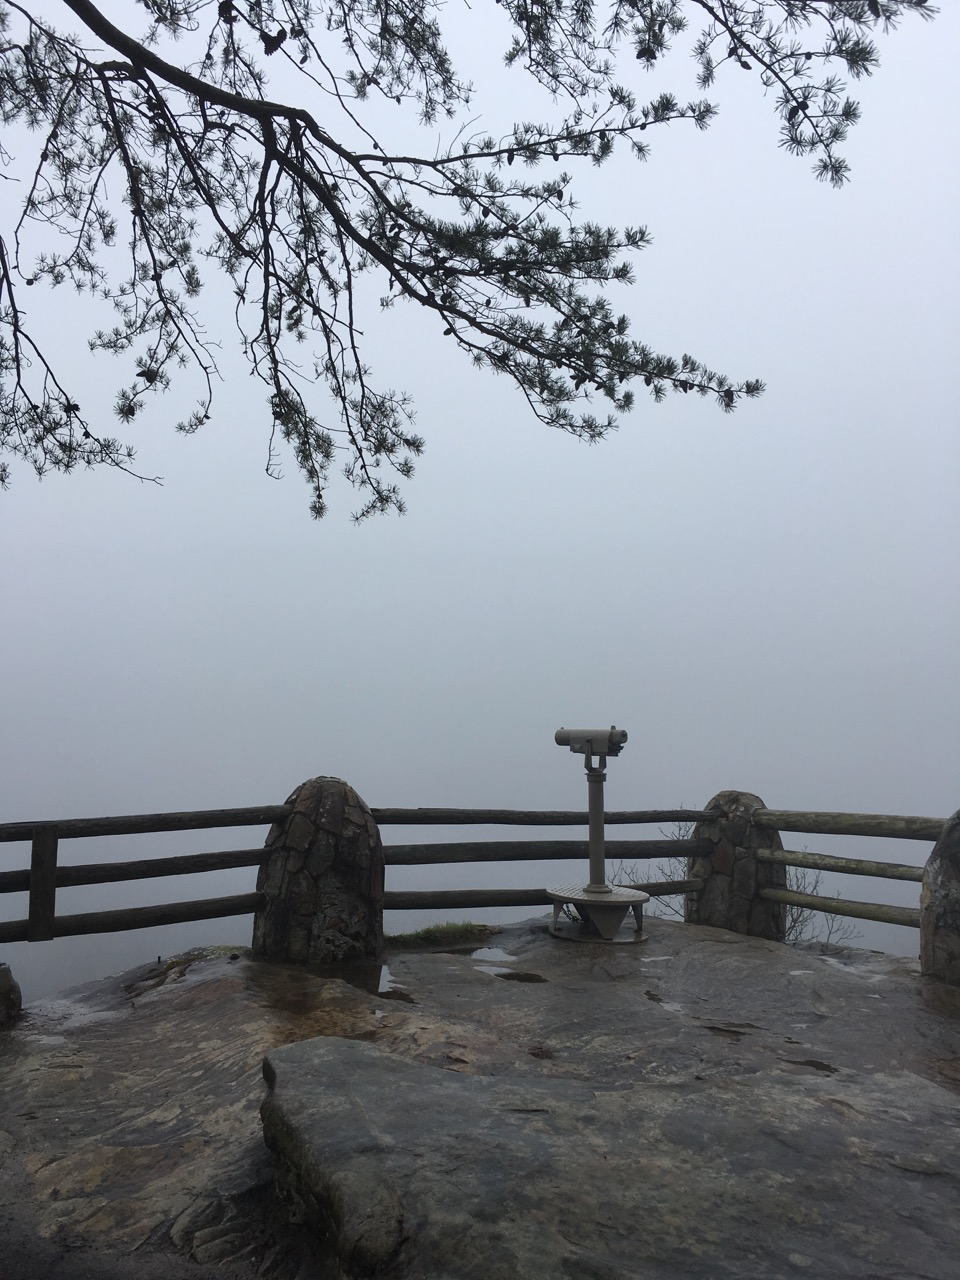 A cloudy scenic overlook